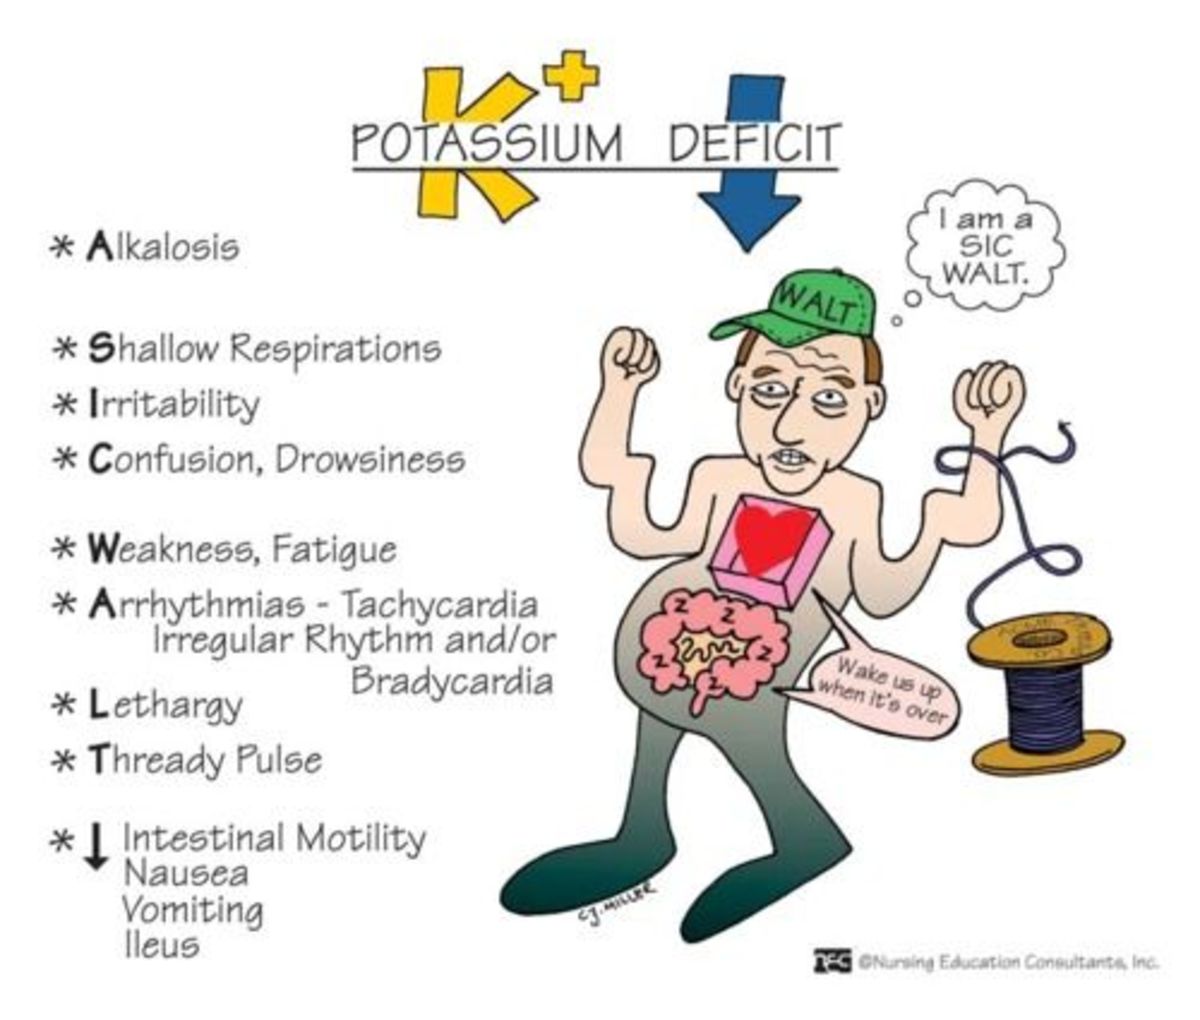 What are the side effects associated with low potassium?